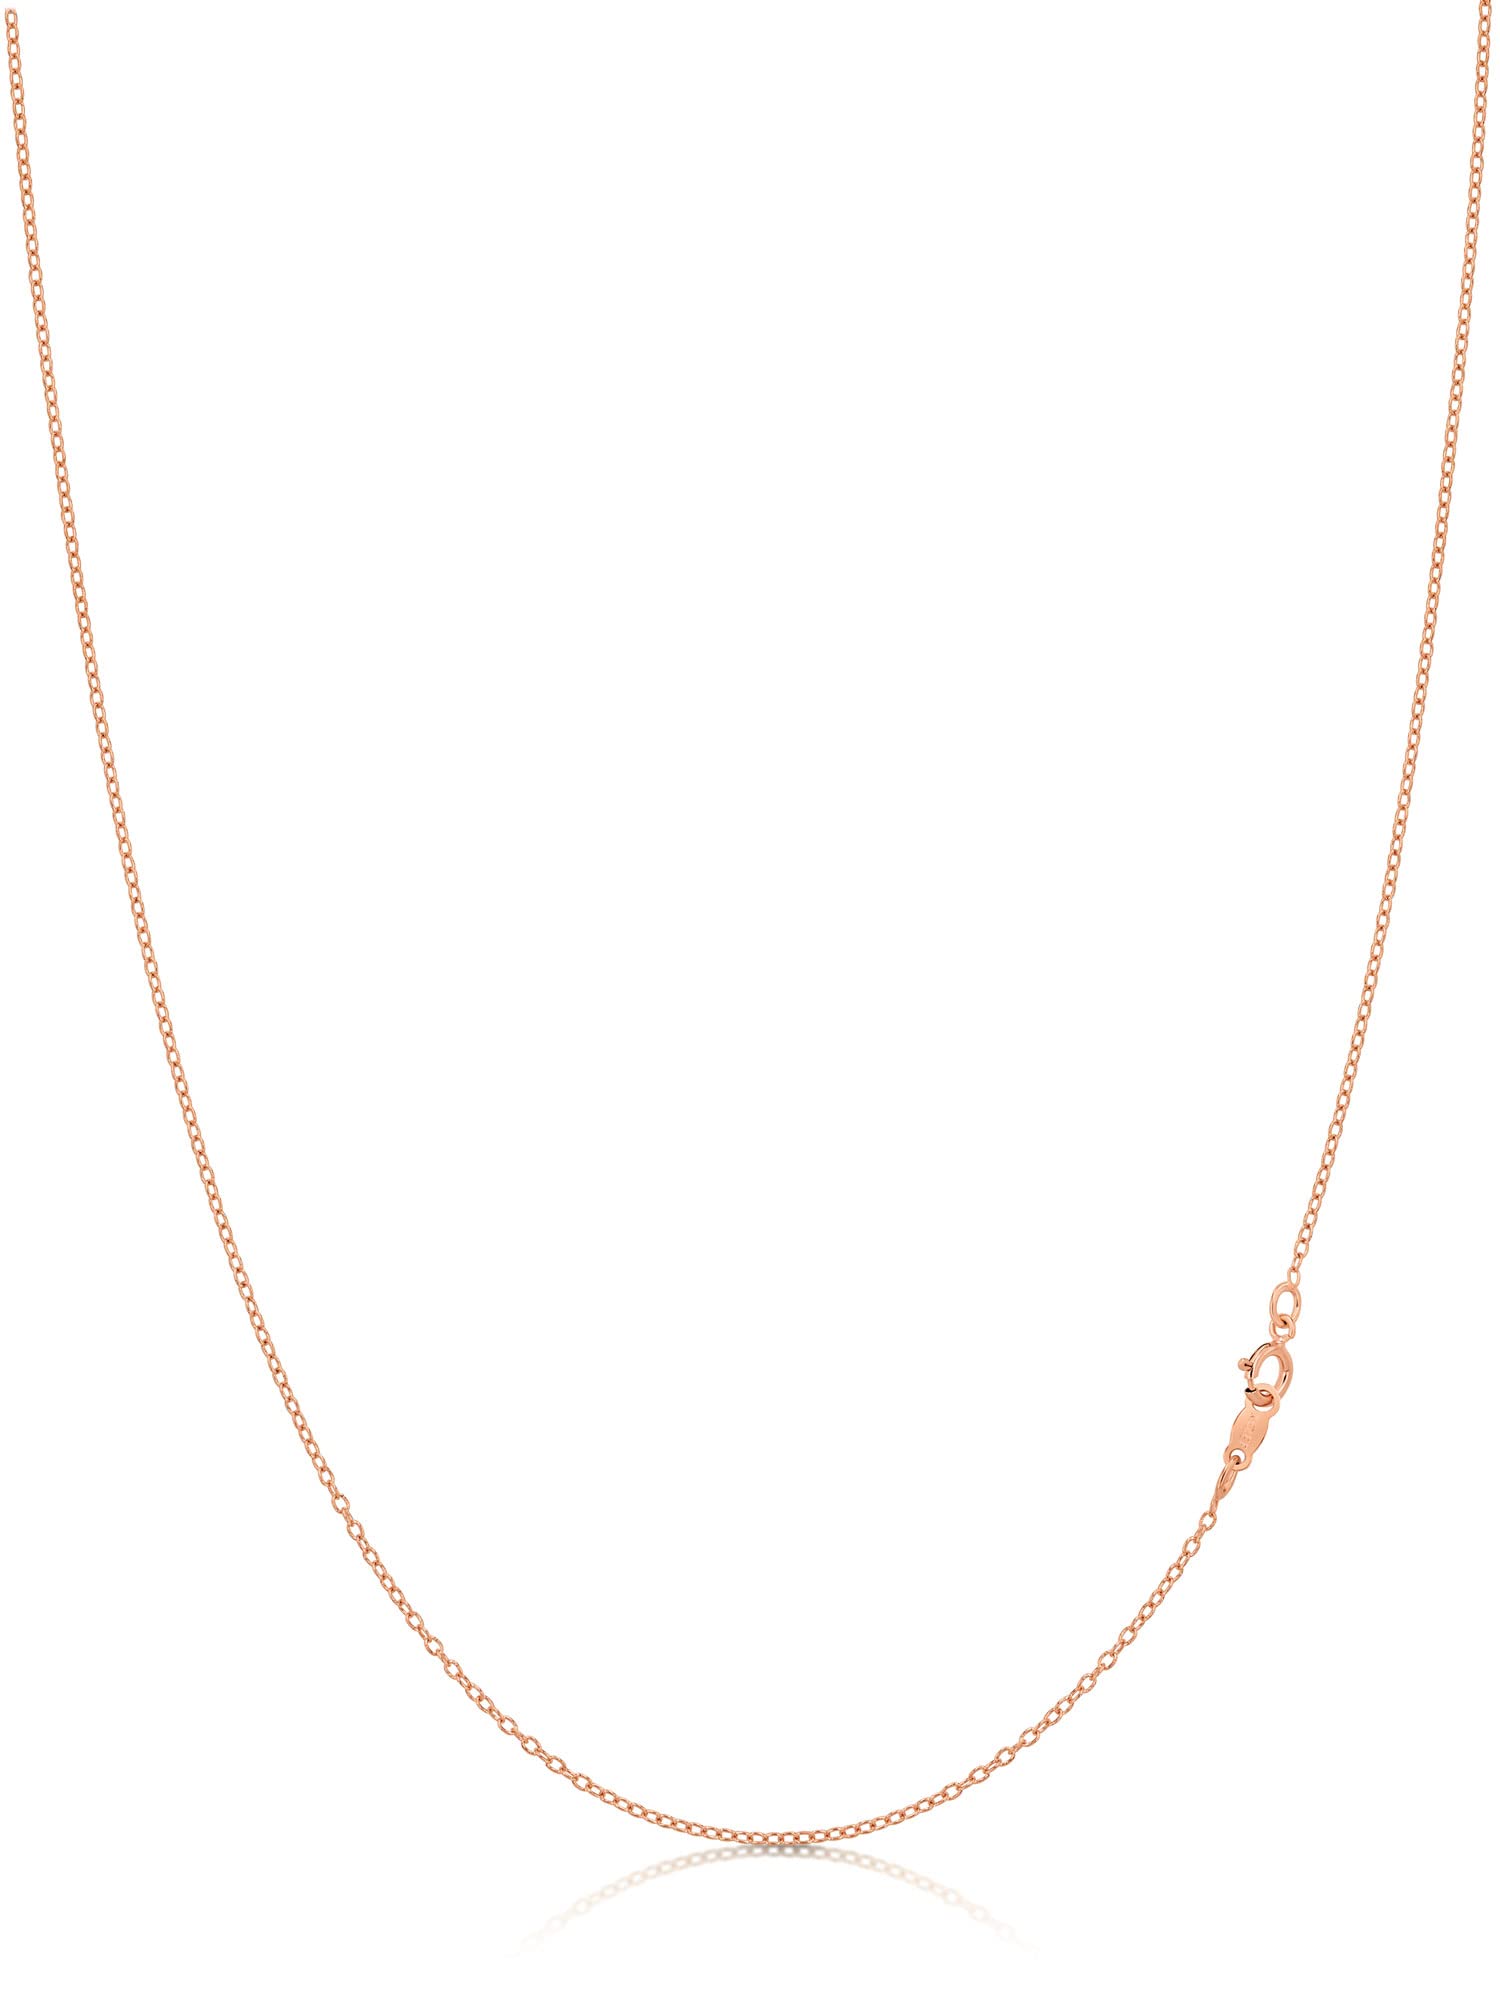 Cable Chain Necklace Sterling Silver Italian 1.3mm Rose Gold Plated Nickel Free 14-36 inch